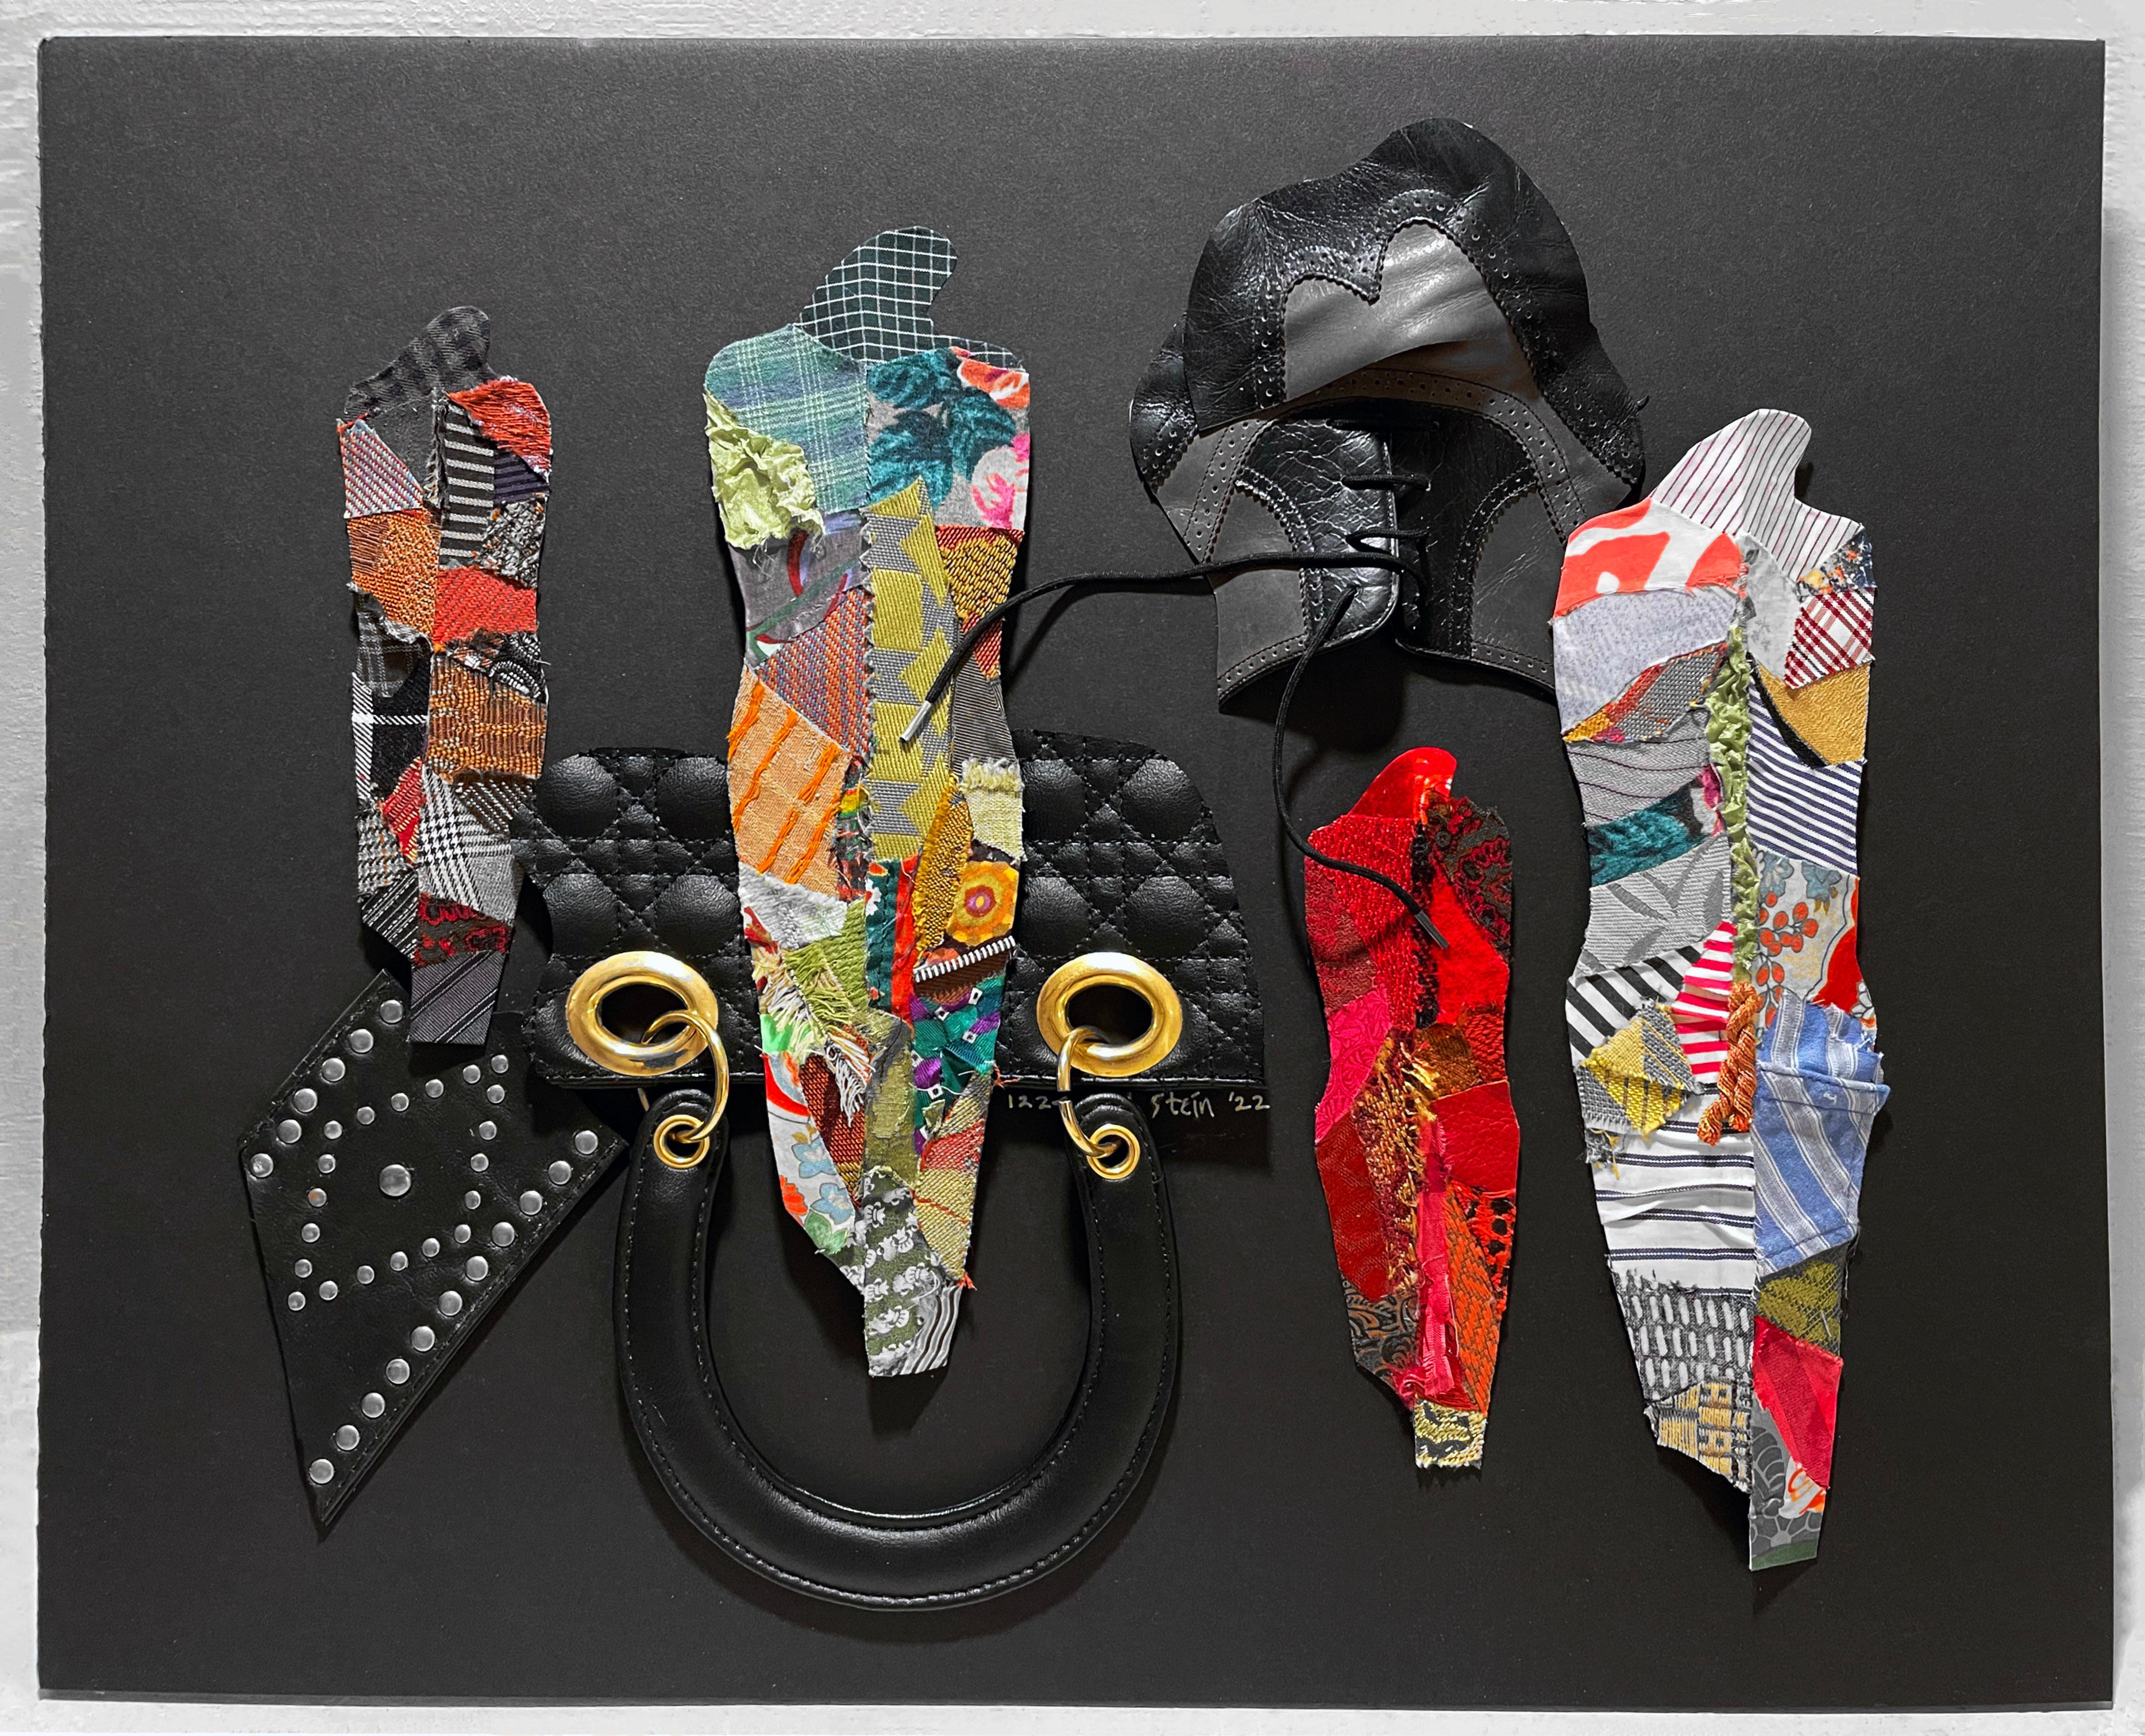 Linda Stein, 1224 - Contemporary Art 3D Mixed Media Fabric Sculptural Collage